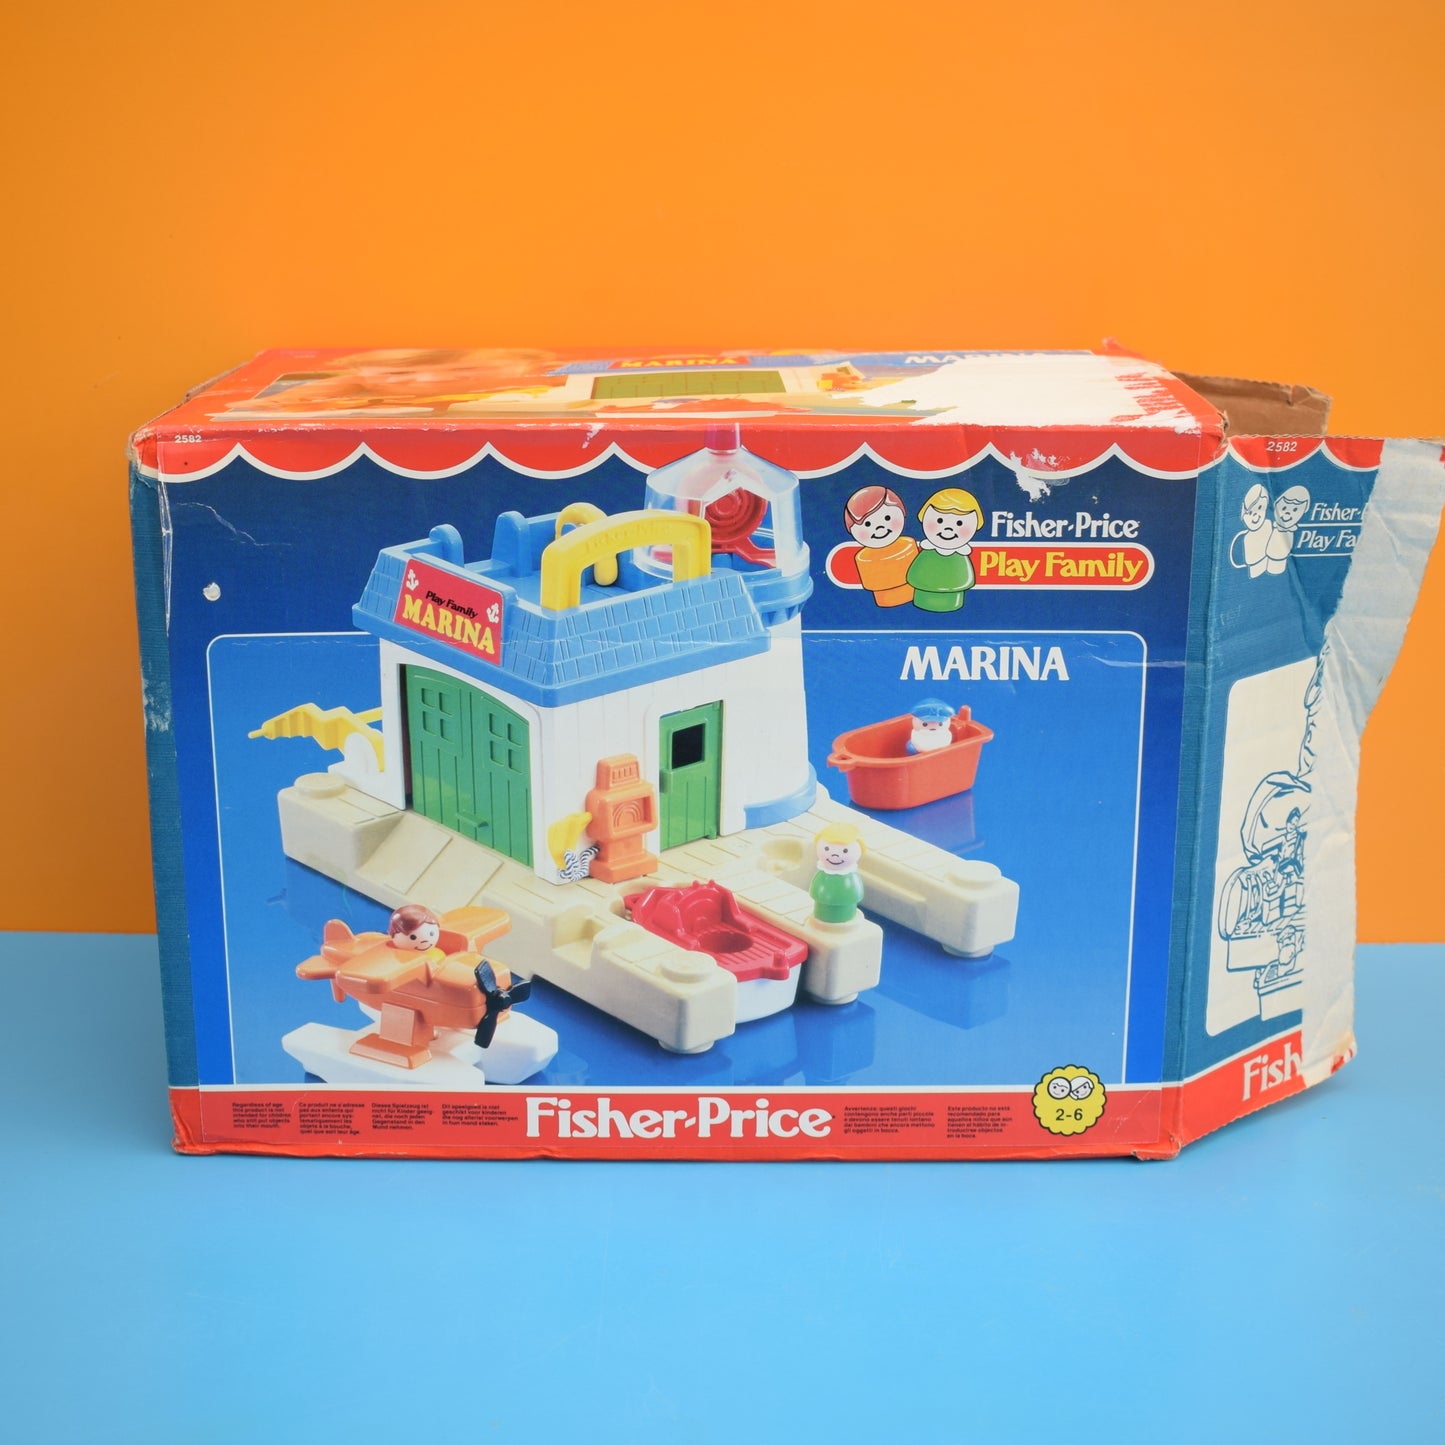 Vintage 1980s Fisher Price - Family Play Marina - Boxed